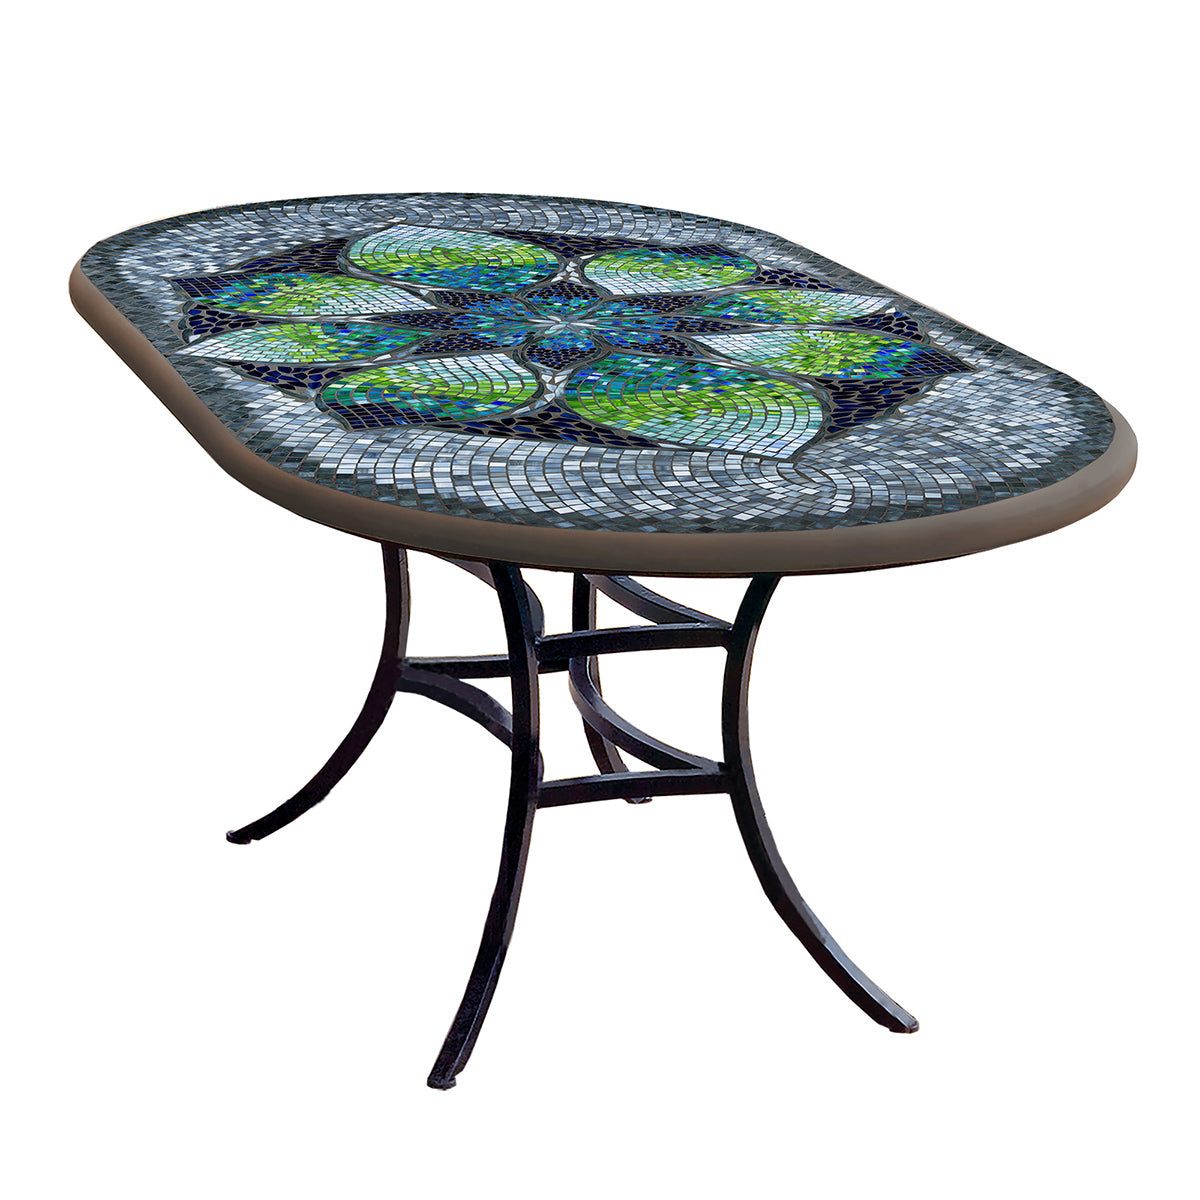 Belcarra Mosaic Oval Bistro-Iron Accents